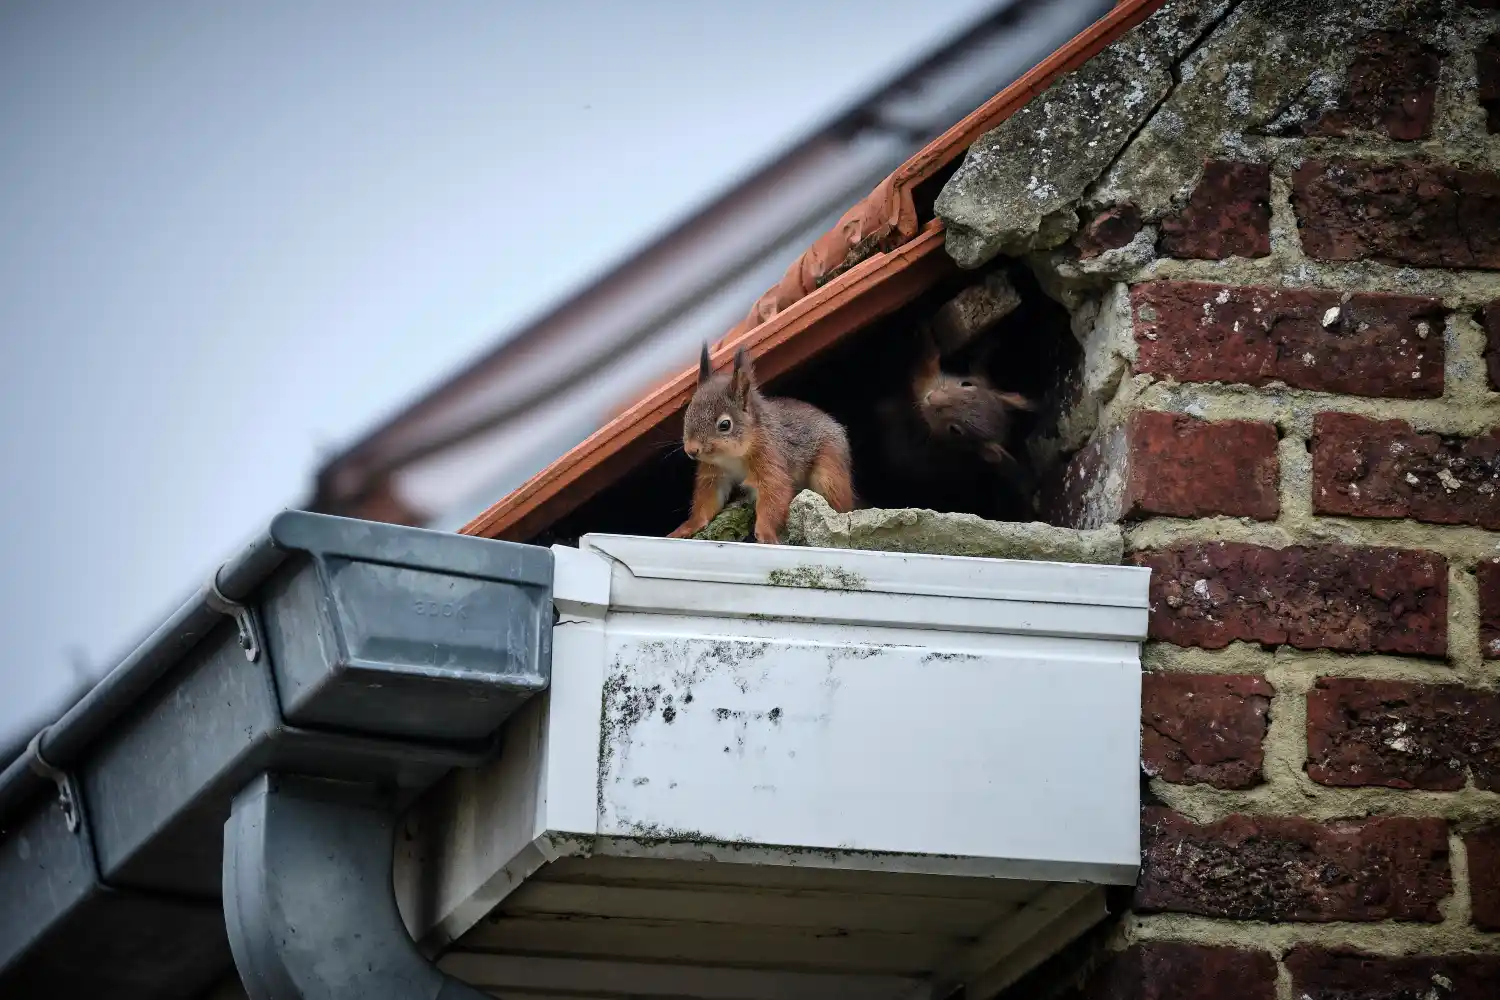 A red squirrel emerging from a nest made in the gutter of a home - keep pests away from your home with Johnson Pest Control in TN